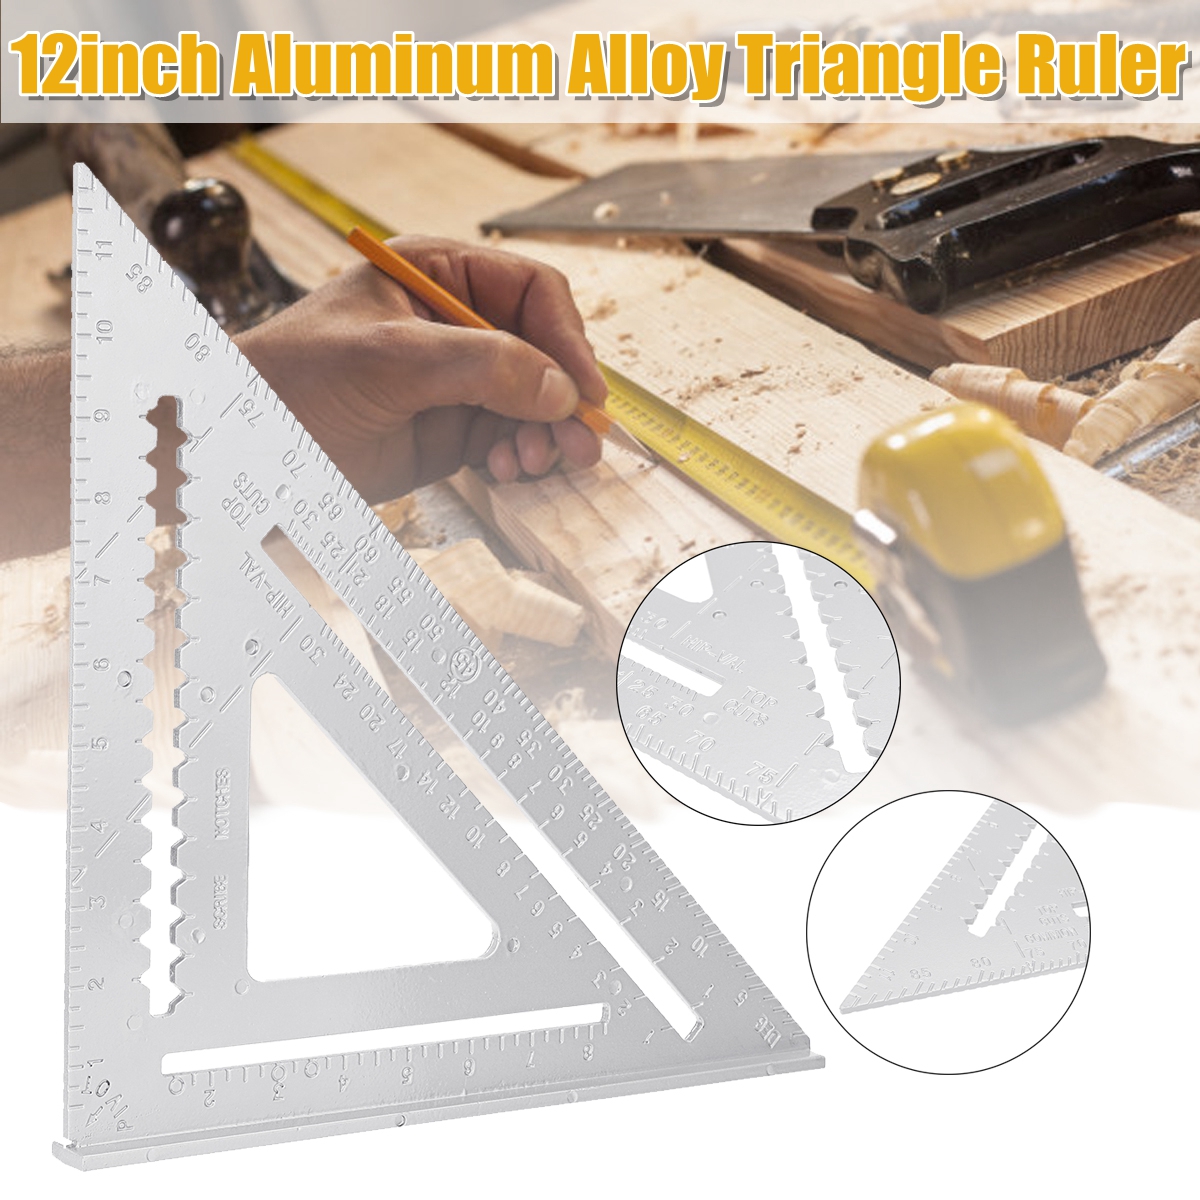 Aluminum-Alloy-Angle-Square-Triangle-Ruler-Roofing-Carpenter-Woodworking-Tool-1779182-2